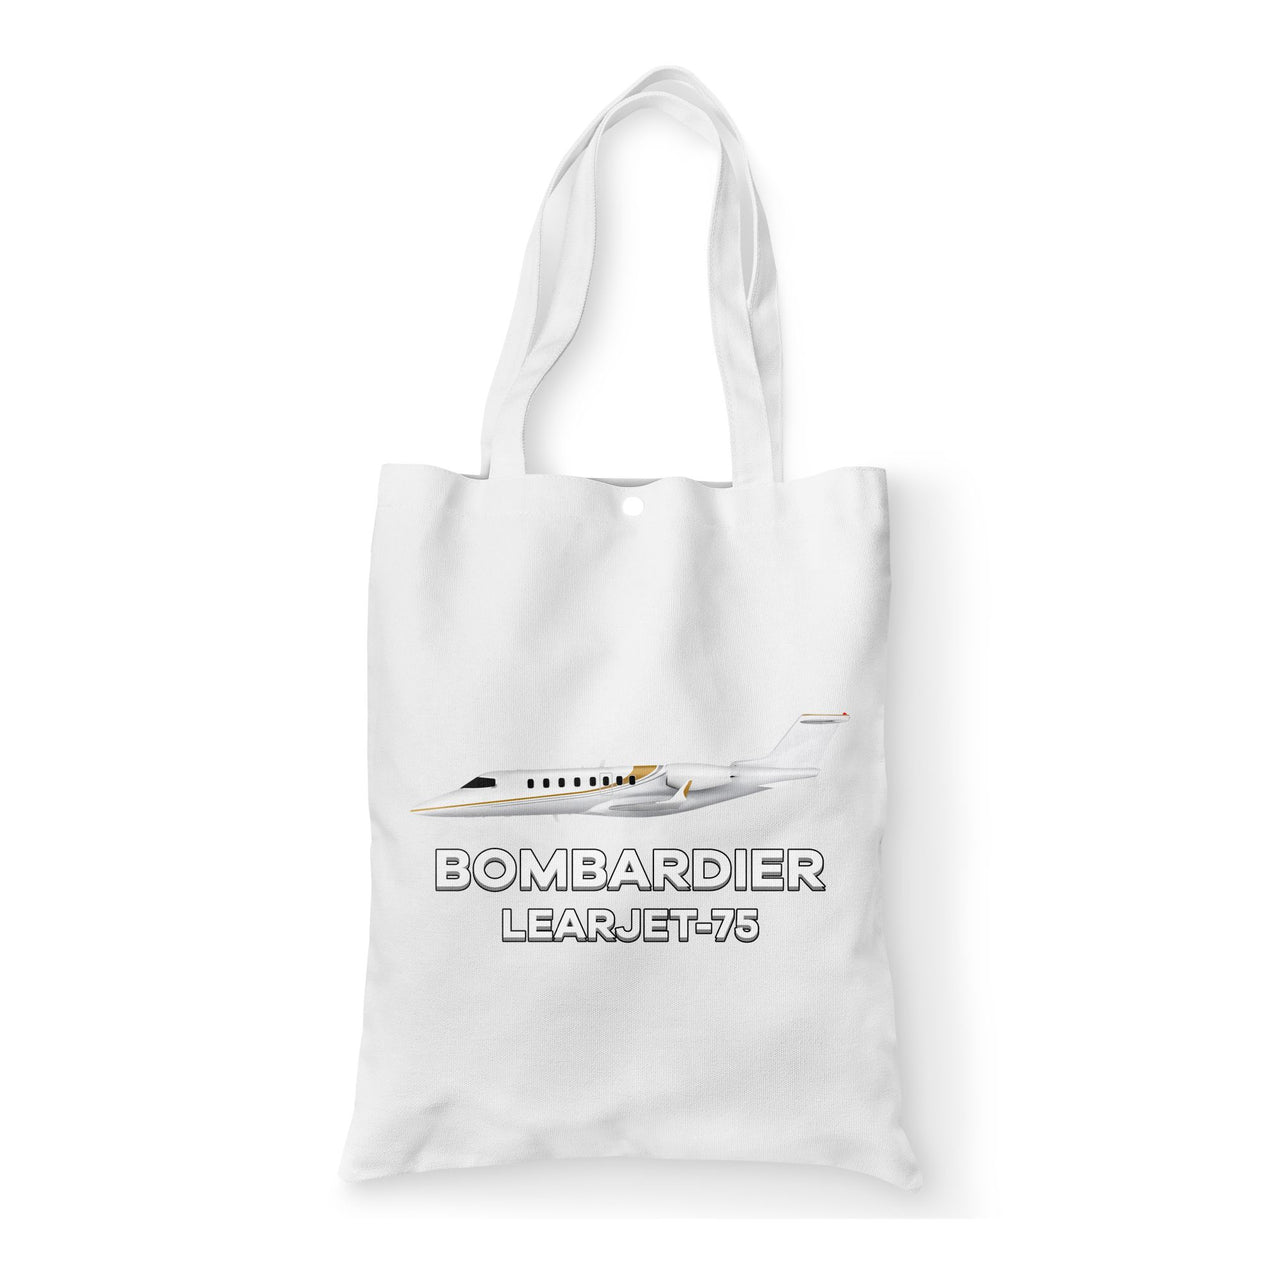 The Bombardier Learjet 75 Designed Tote Bags